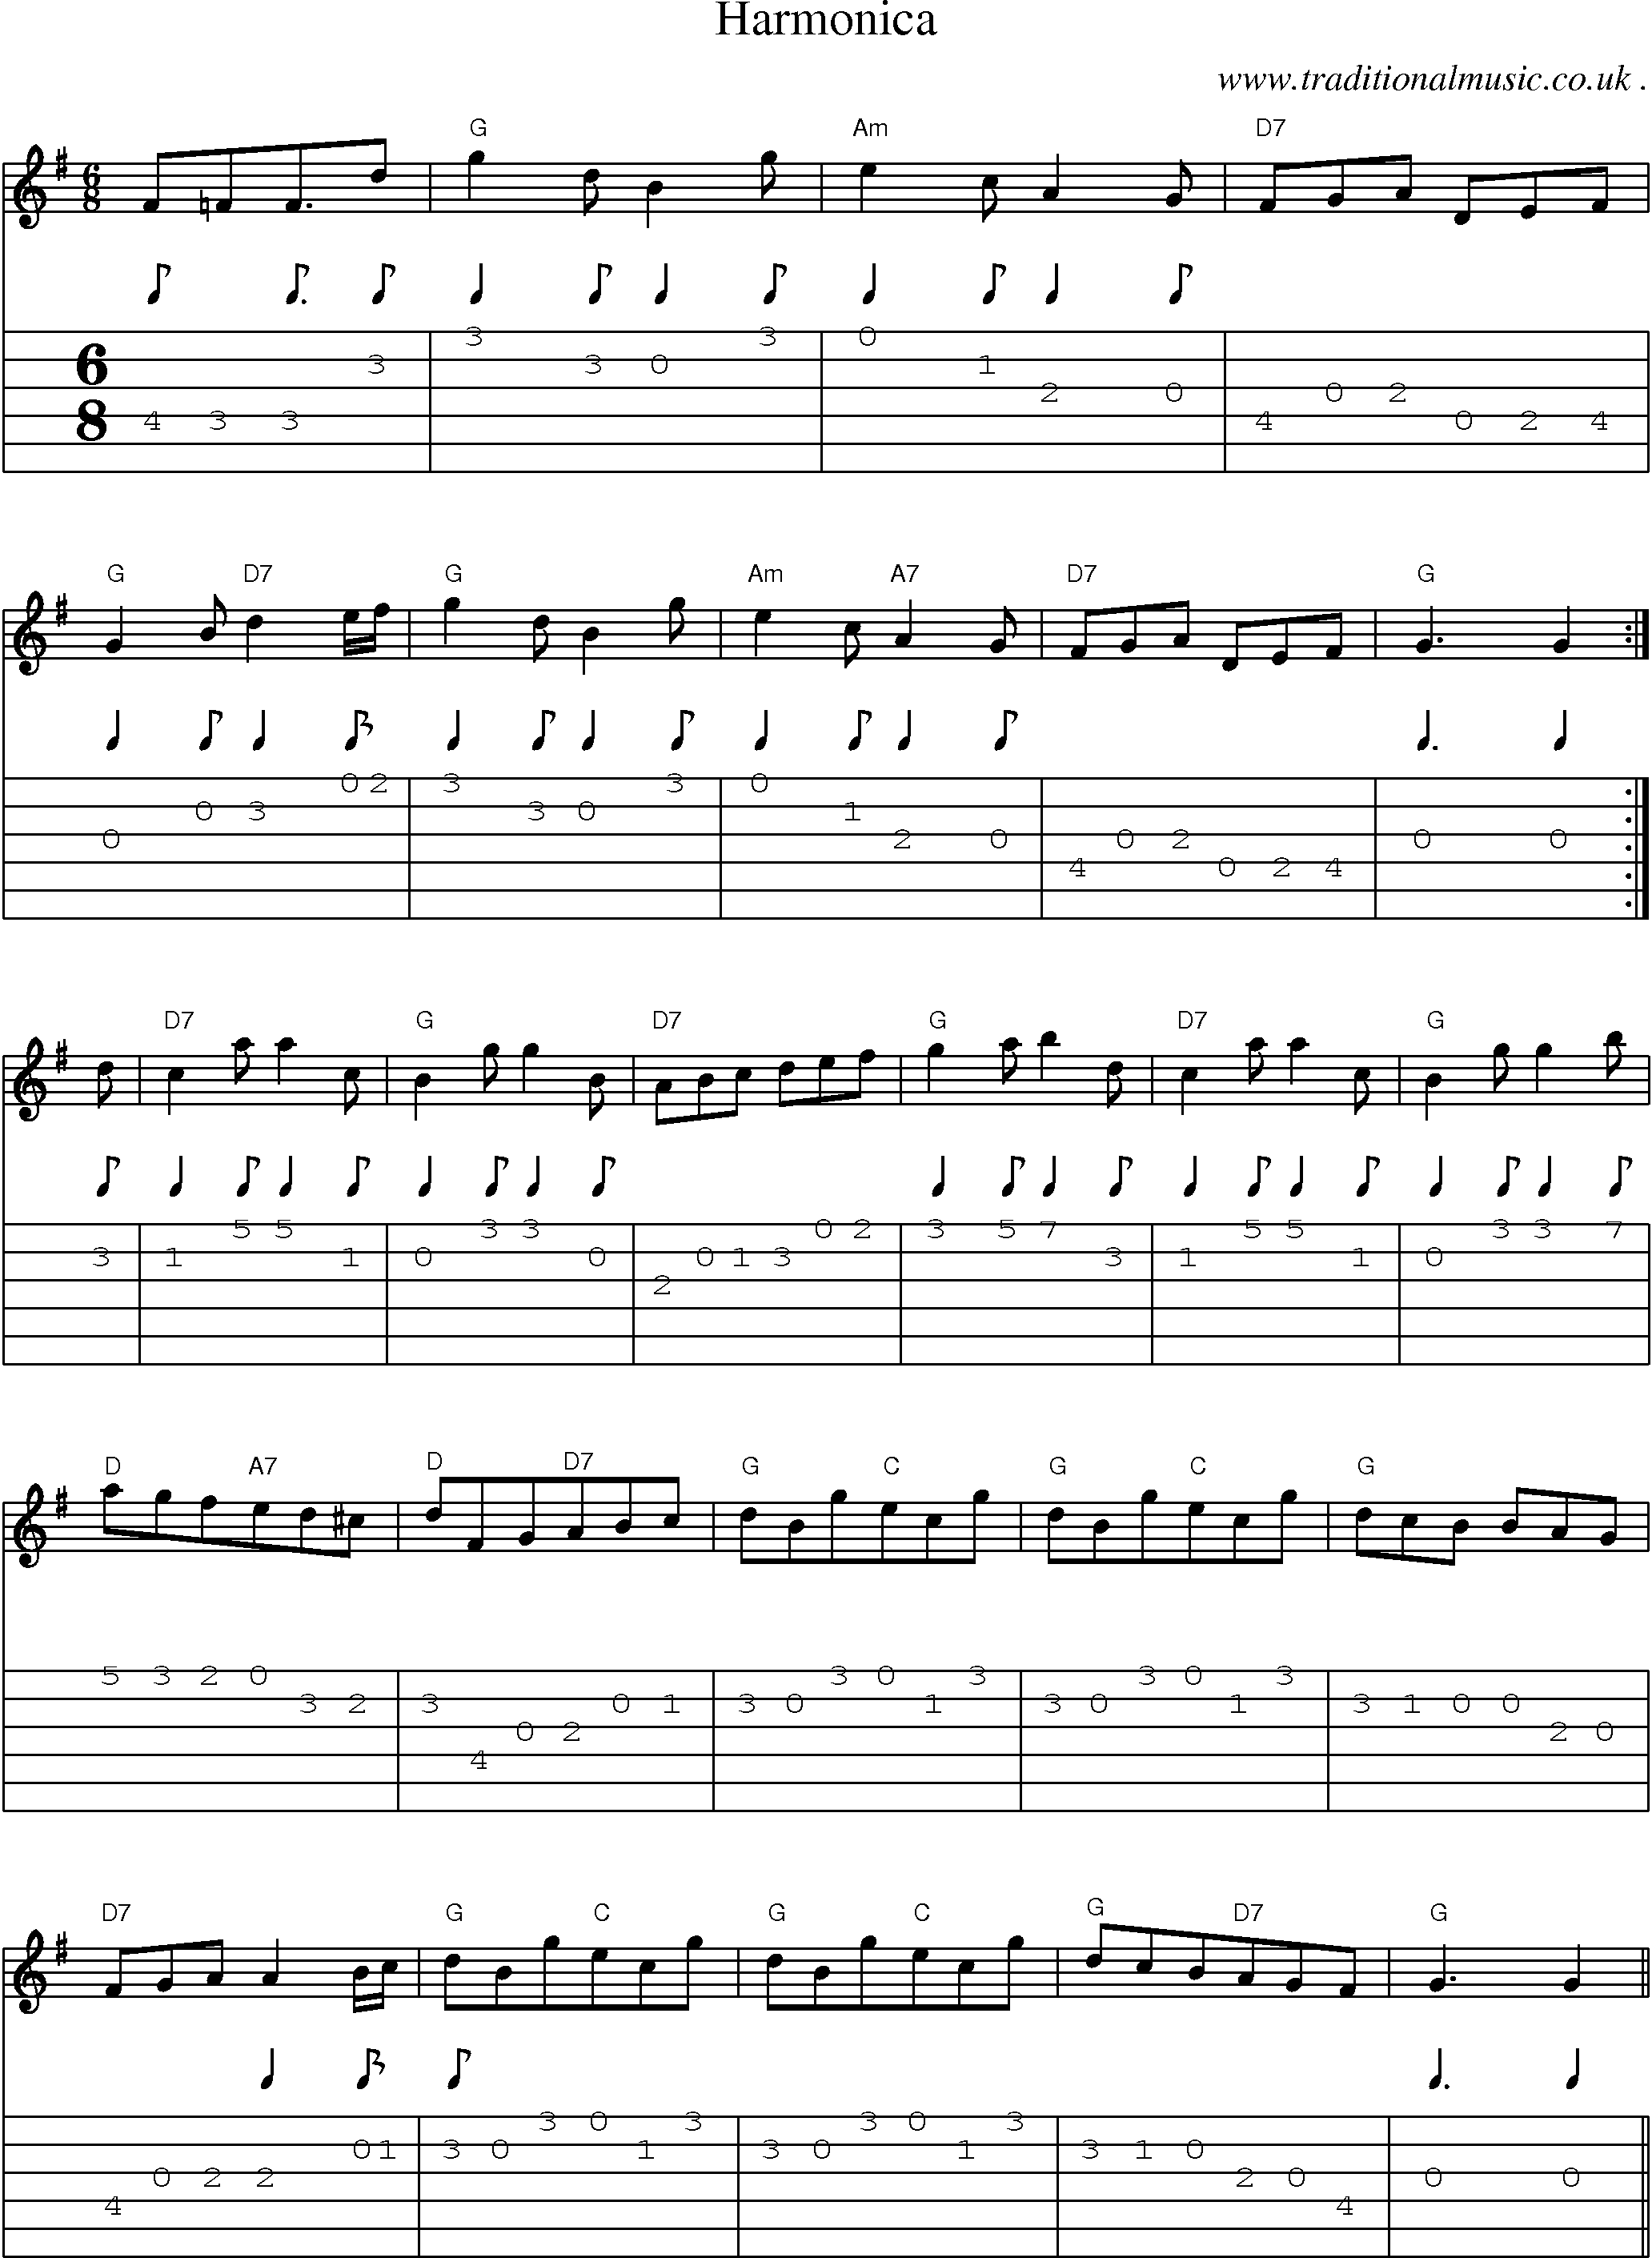 Sheet-Music and Guitar Tabs for Harmonica